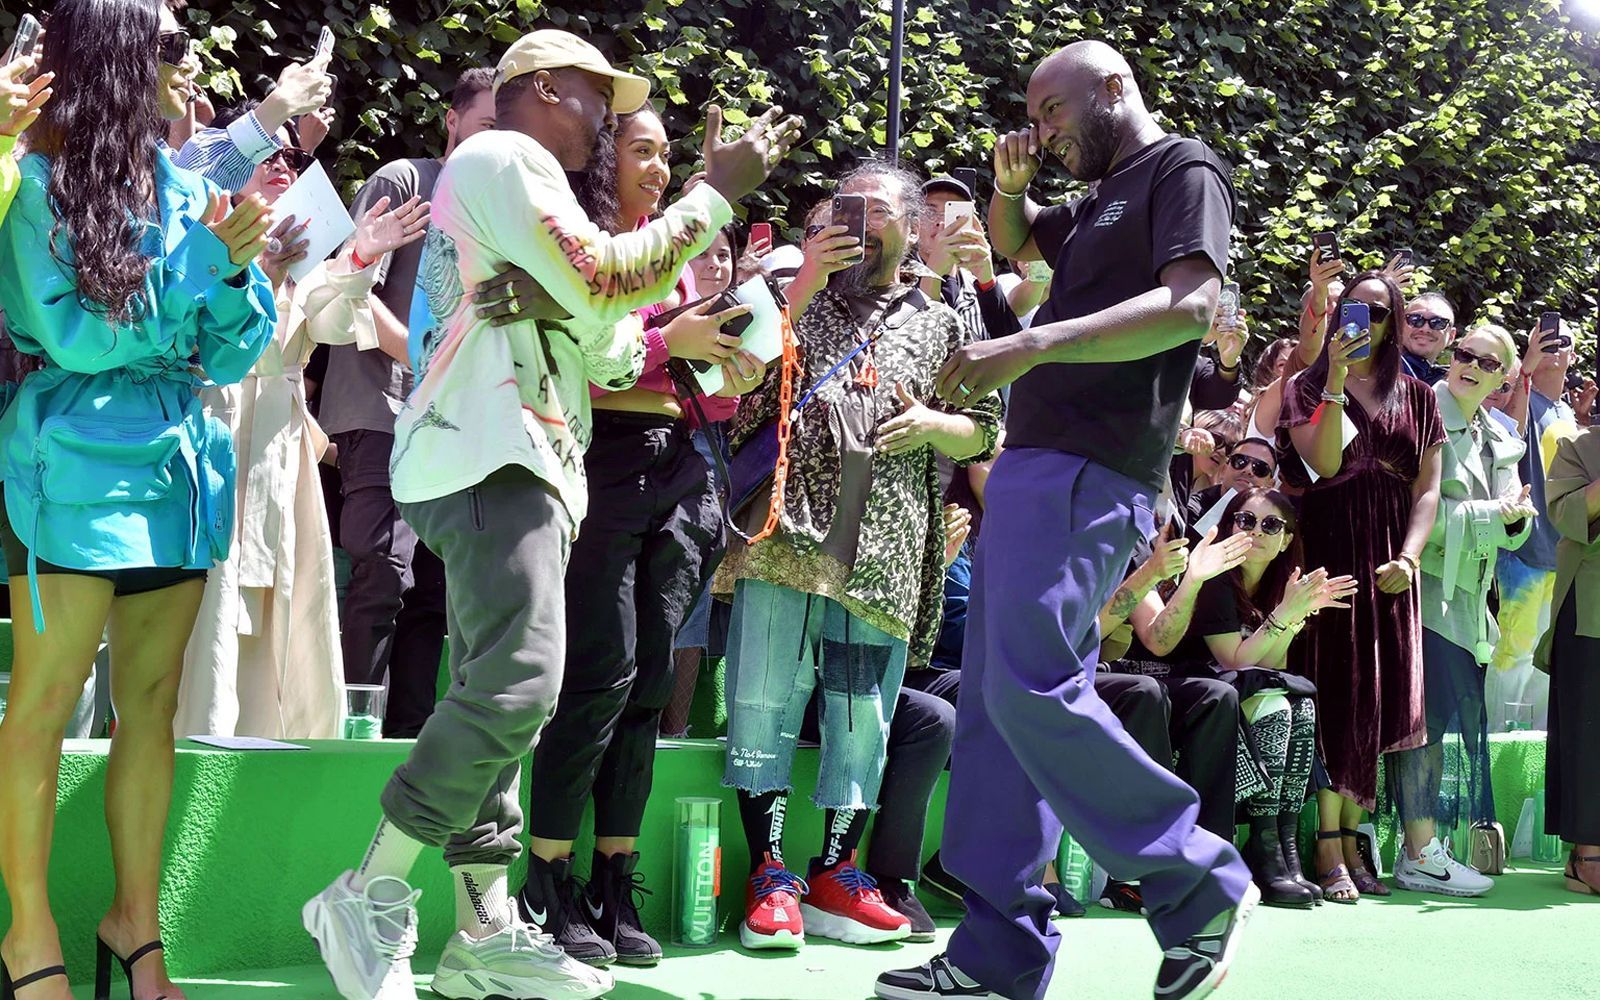 Can Kanye West succeed Virgil Abloh at Louis Vuitton? Some rumors say yes, but the chances are very slim